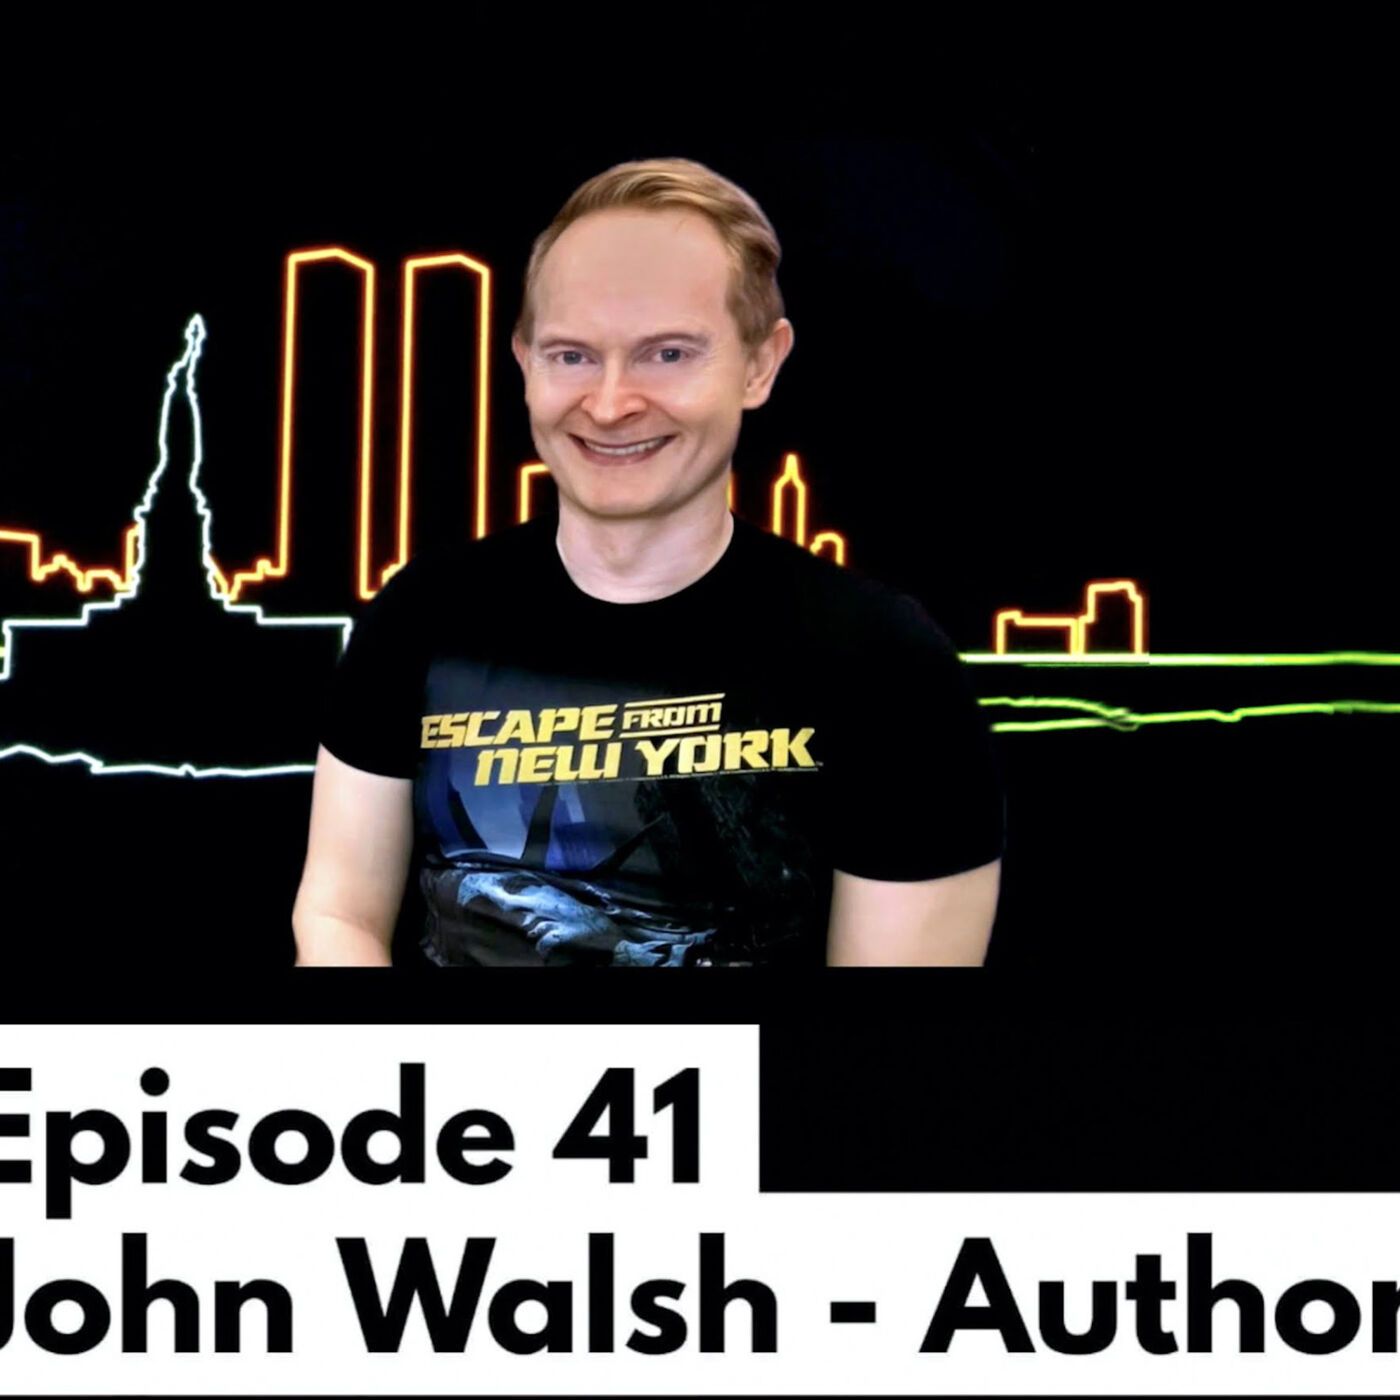 41 - John Walsh - Author of Escape from New York - The Official Story of the Film